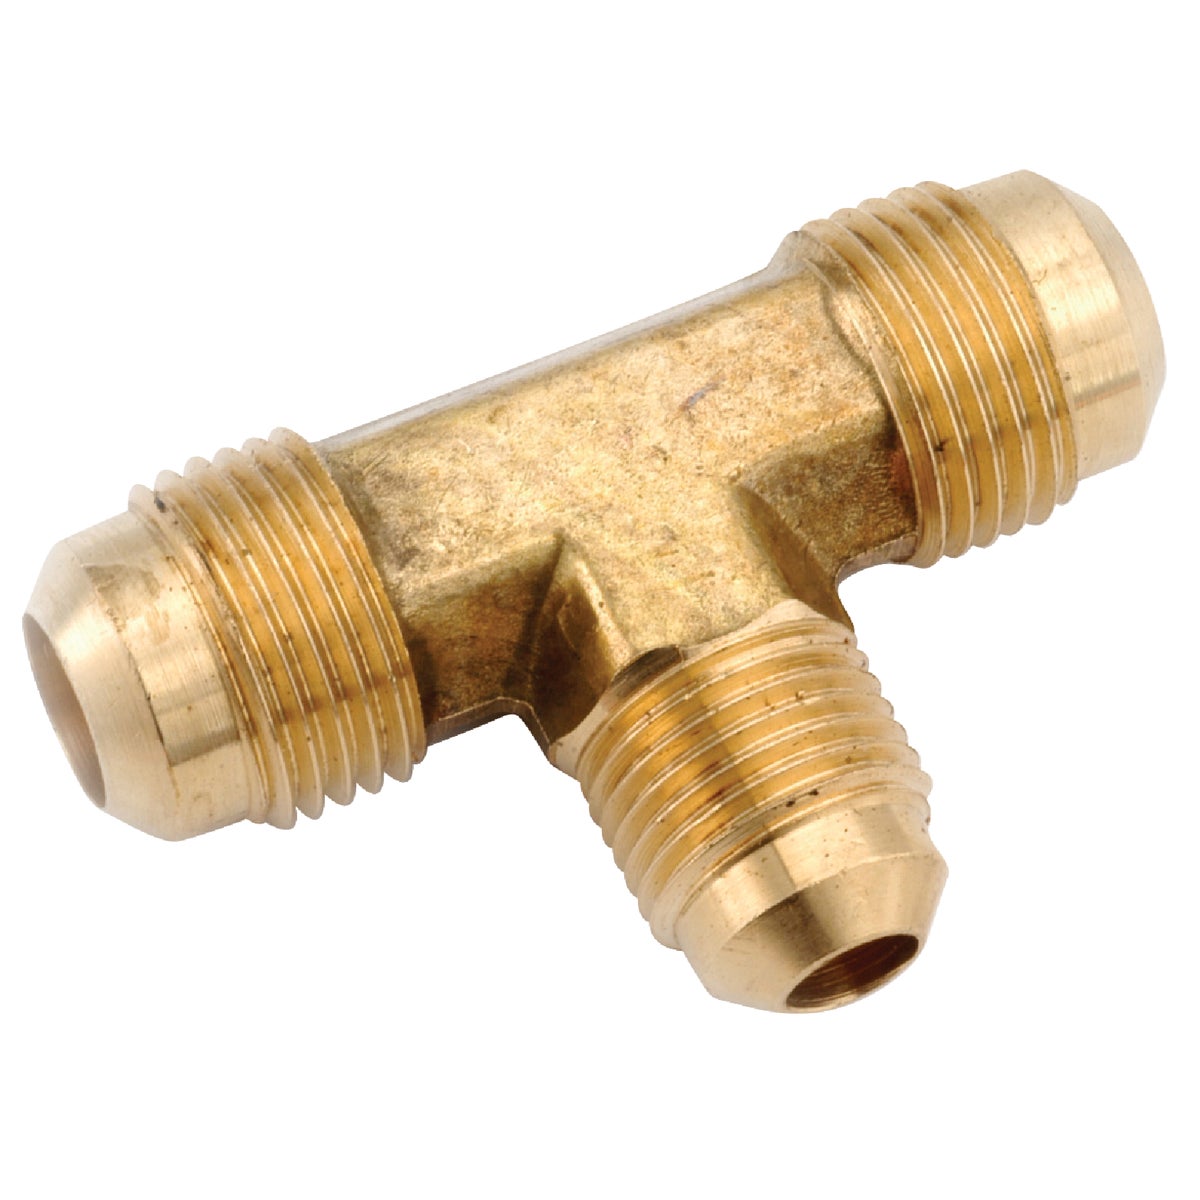 Anderson Metals 1/2 In. x 5/8 In. Brass Forged Flare Reducing Tee